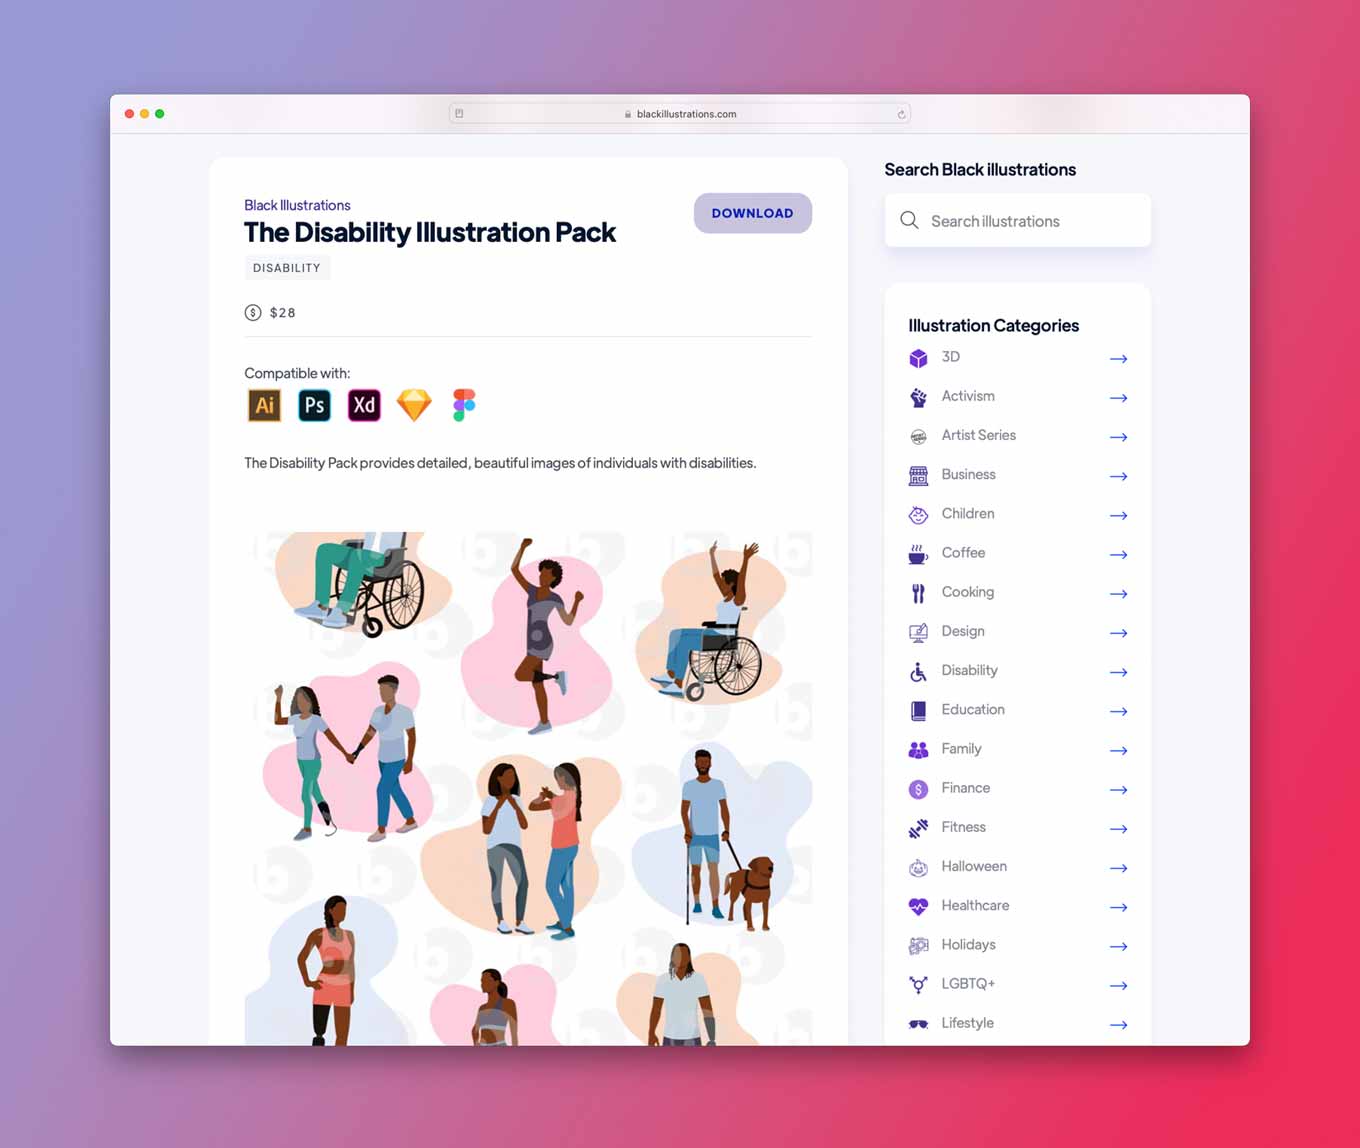 Screenshot of Black Illustrations Website: The Disability Illustrations pack, showing stock images of people with disabilities joyfully living their lives